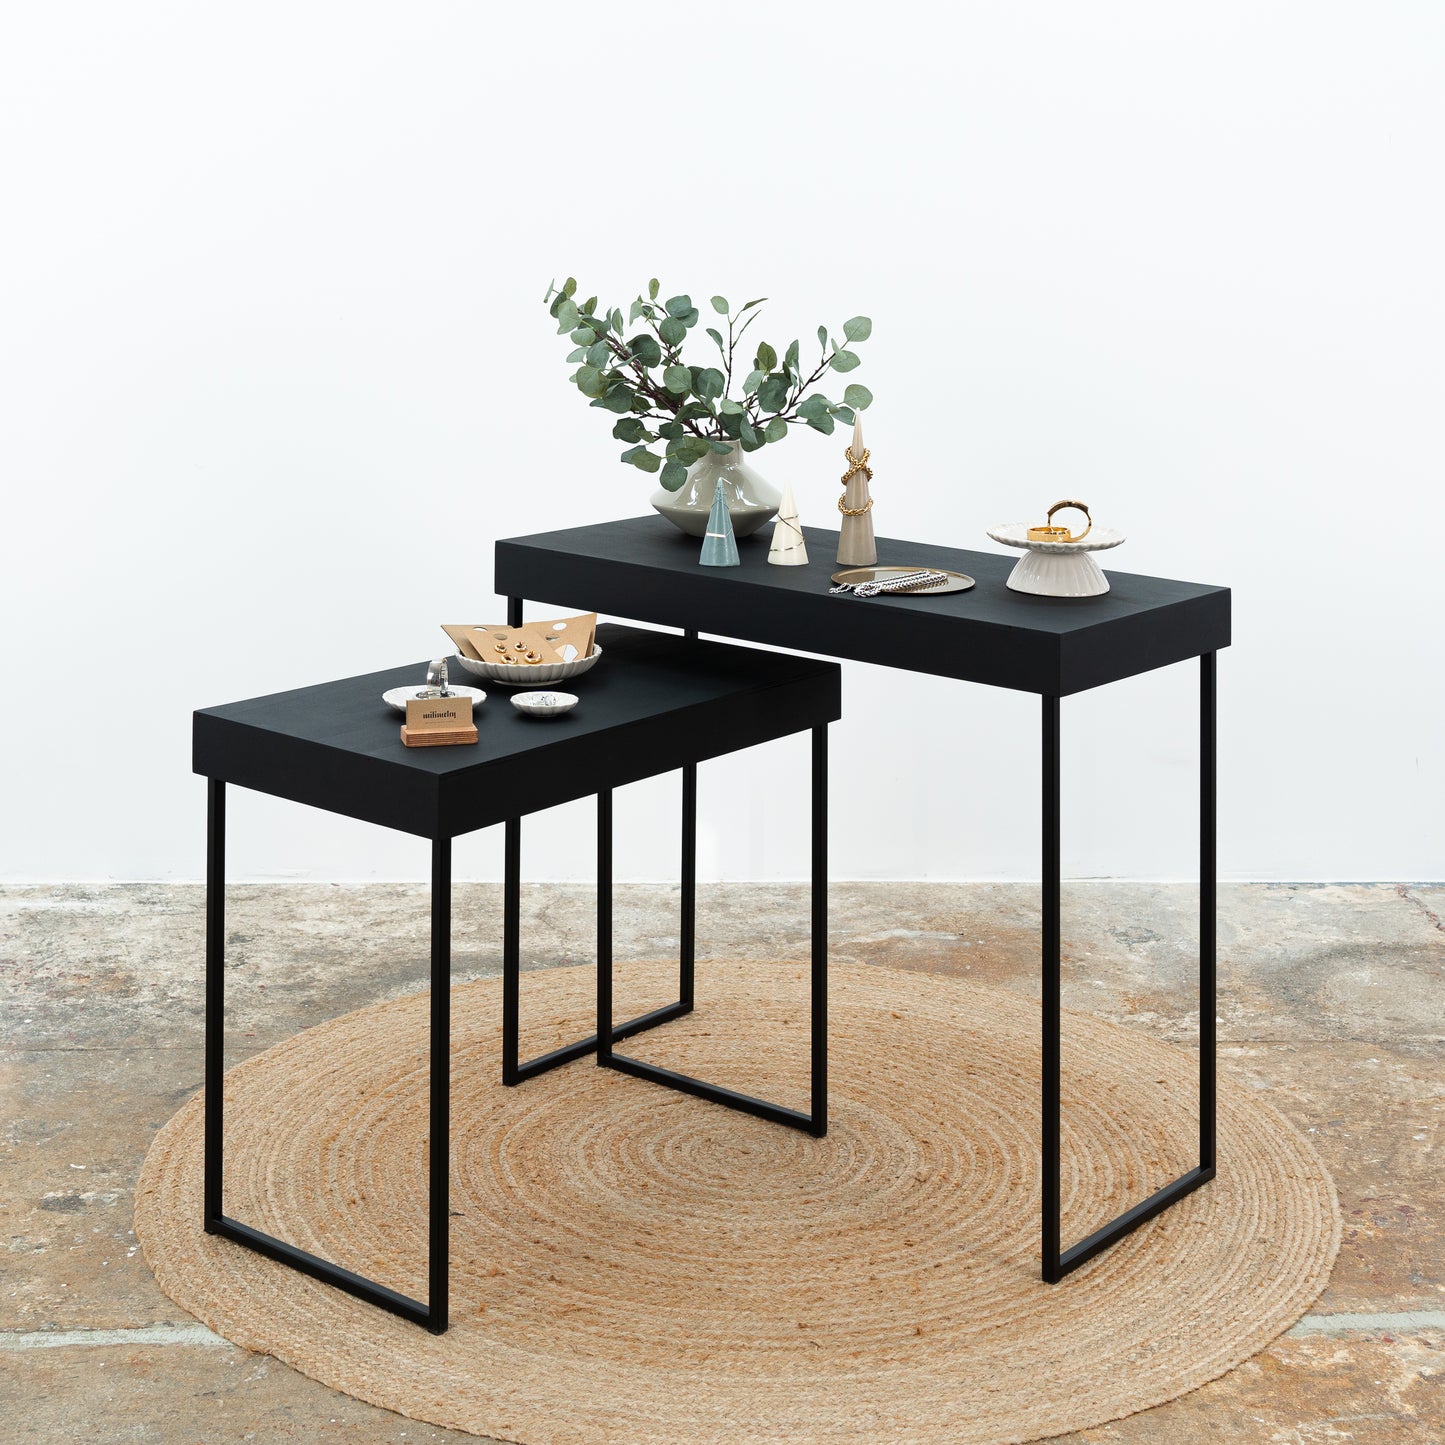 2 display tables SC-15-BL-BL, foldable nesting tables